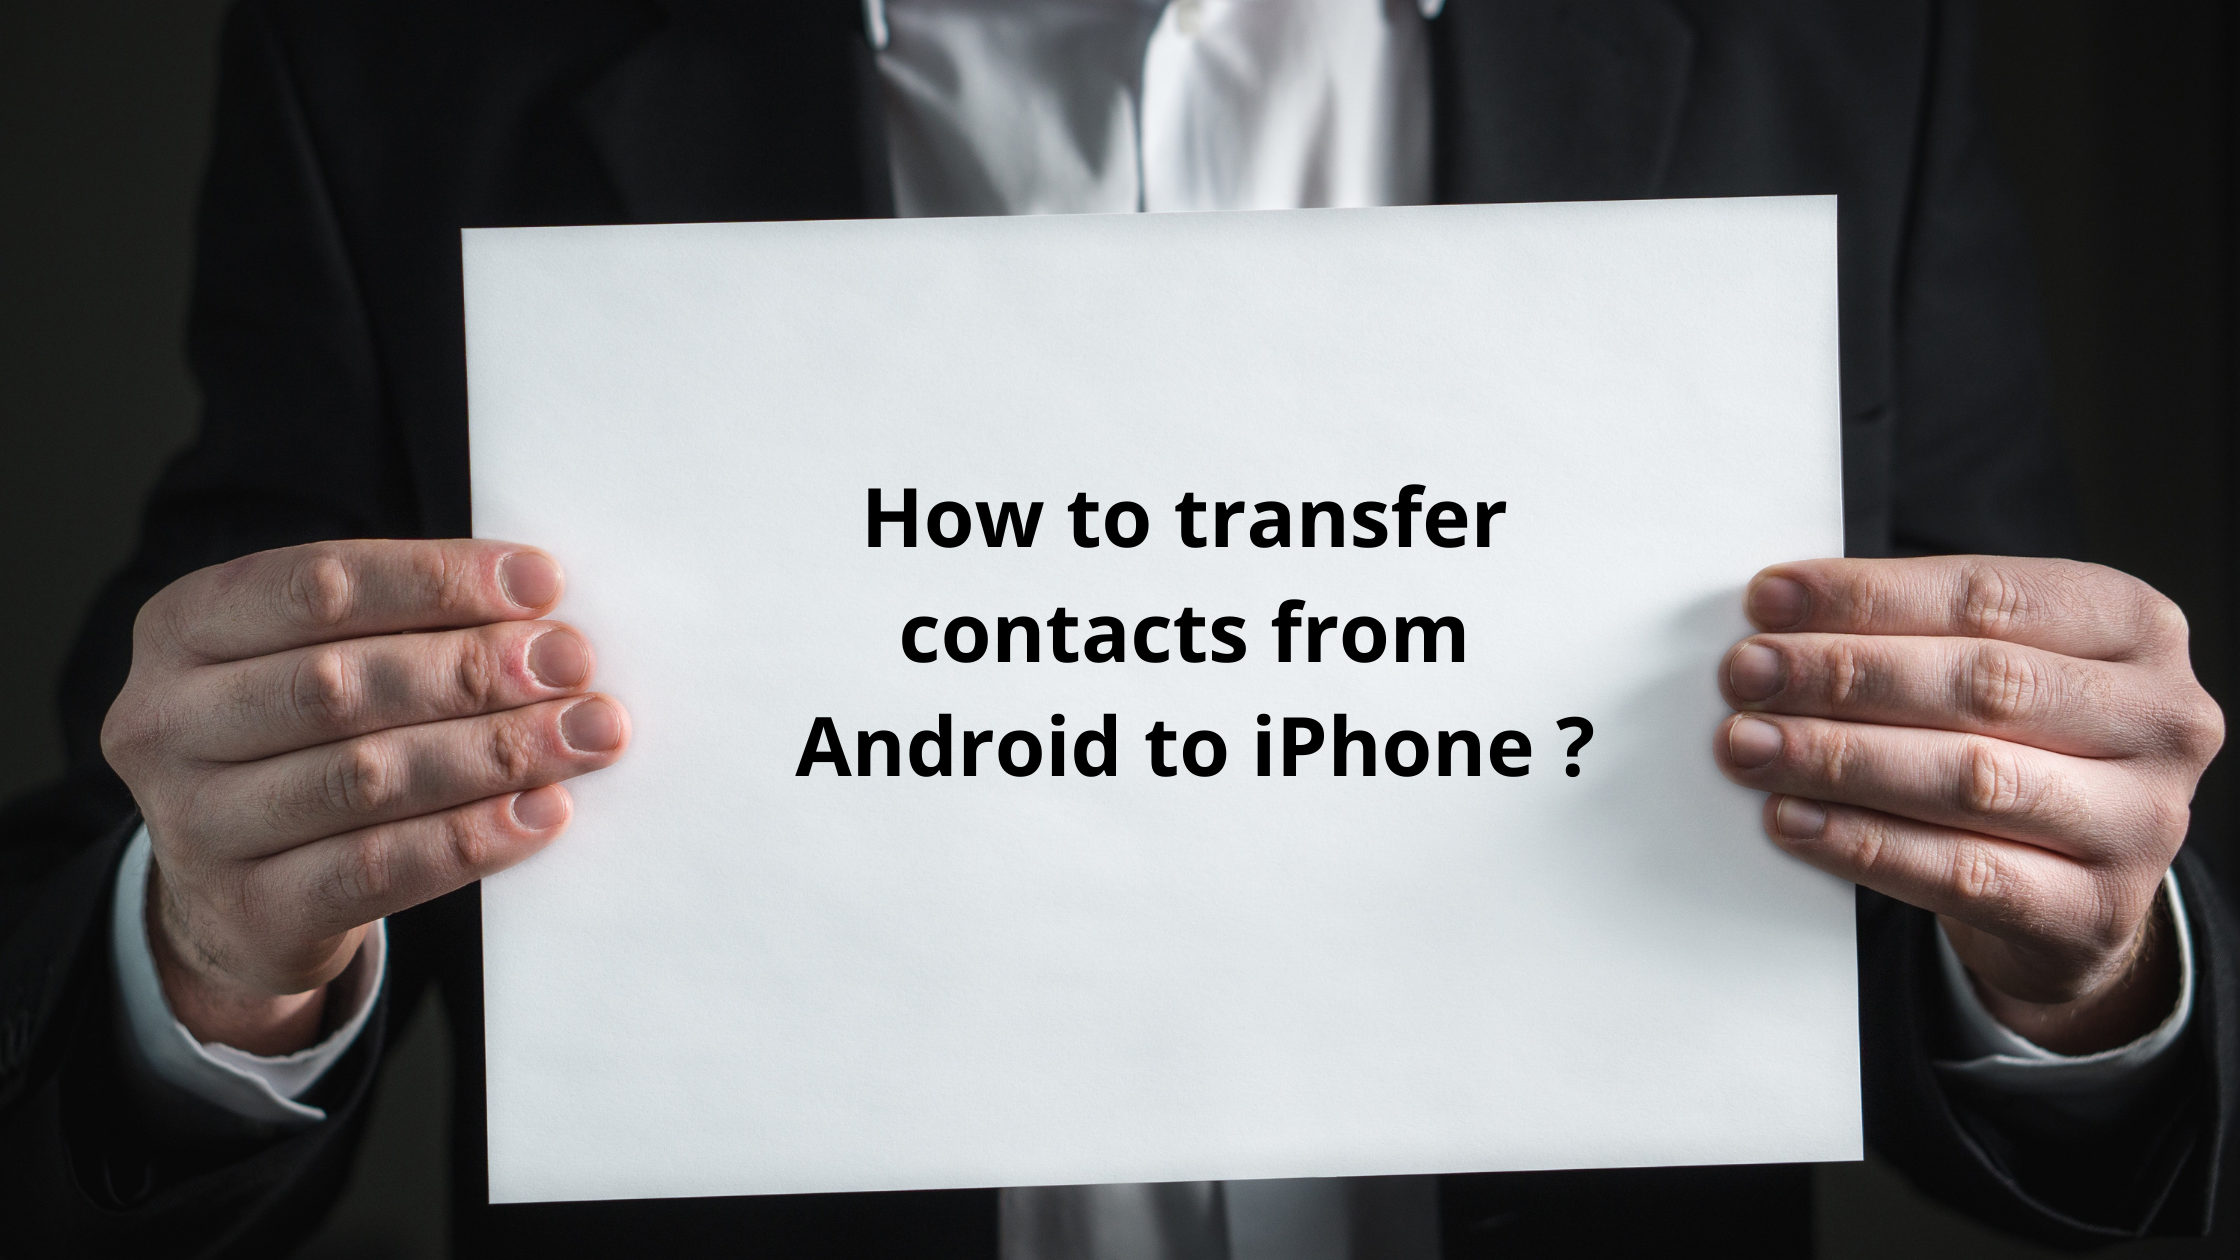 How to easily transfer contacts from Android to iPhone?